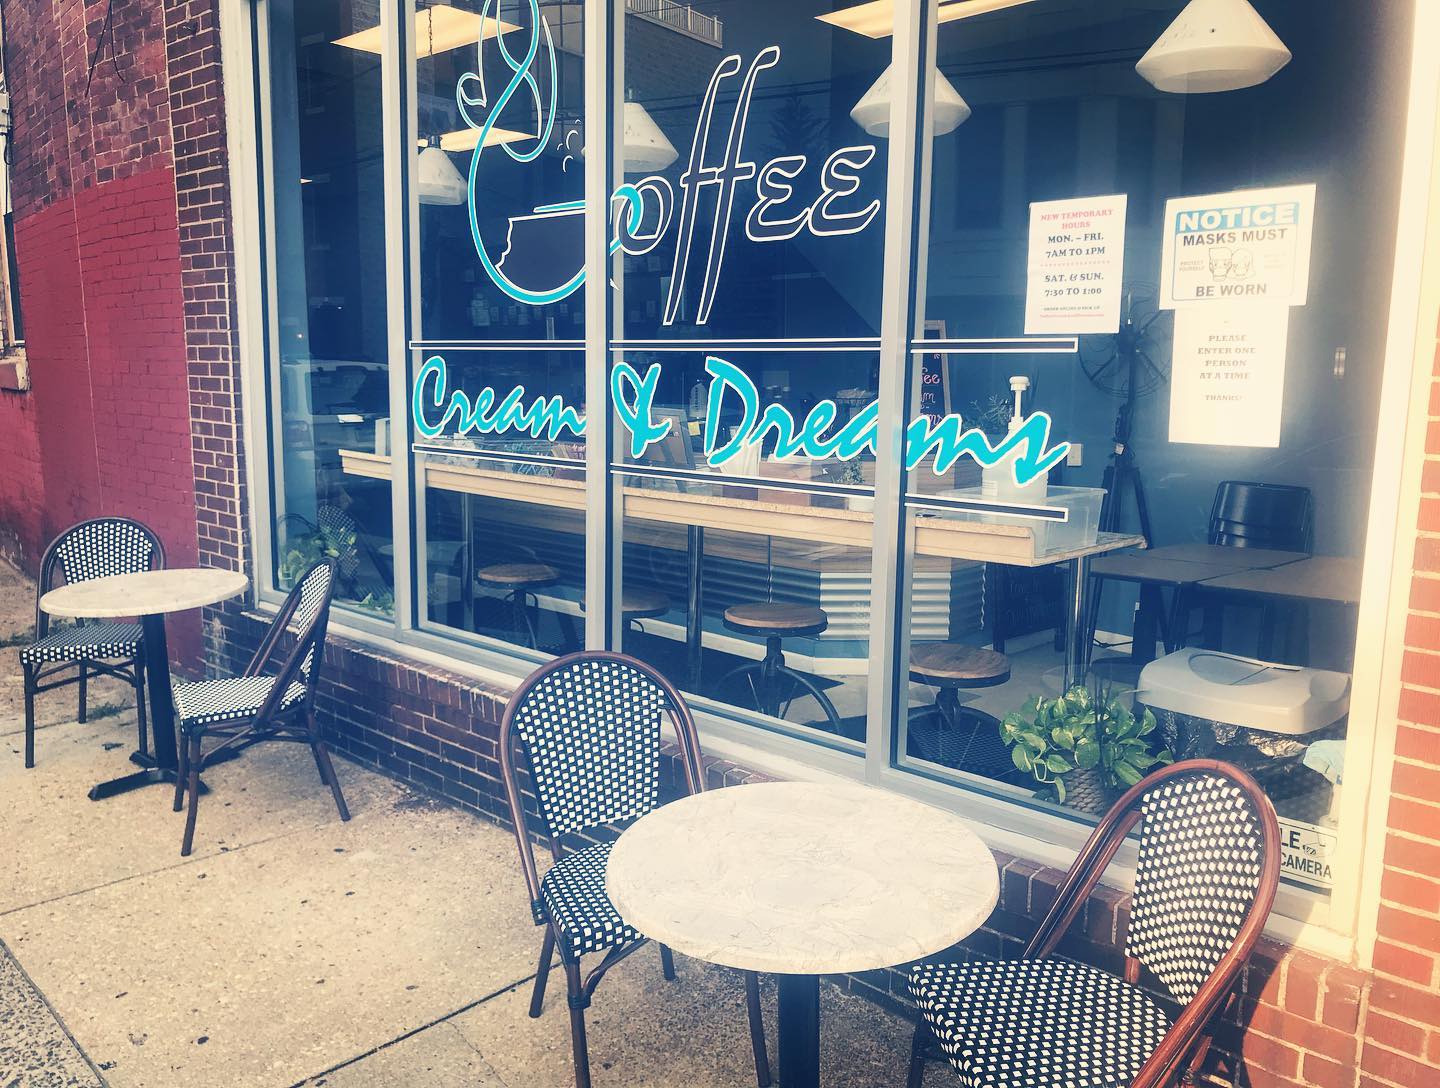 Stephanie Ford and Sonja West have been in the cafe business since Oct 2019. Photo: CoffeeCreamandDreams